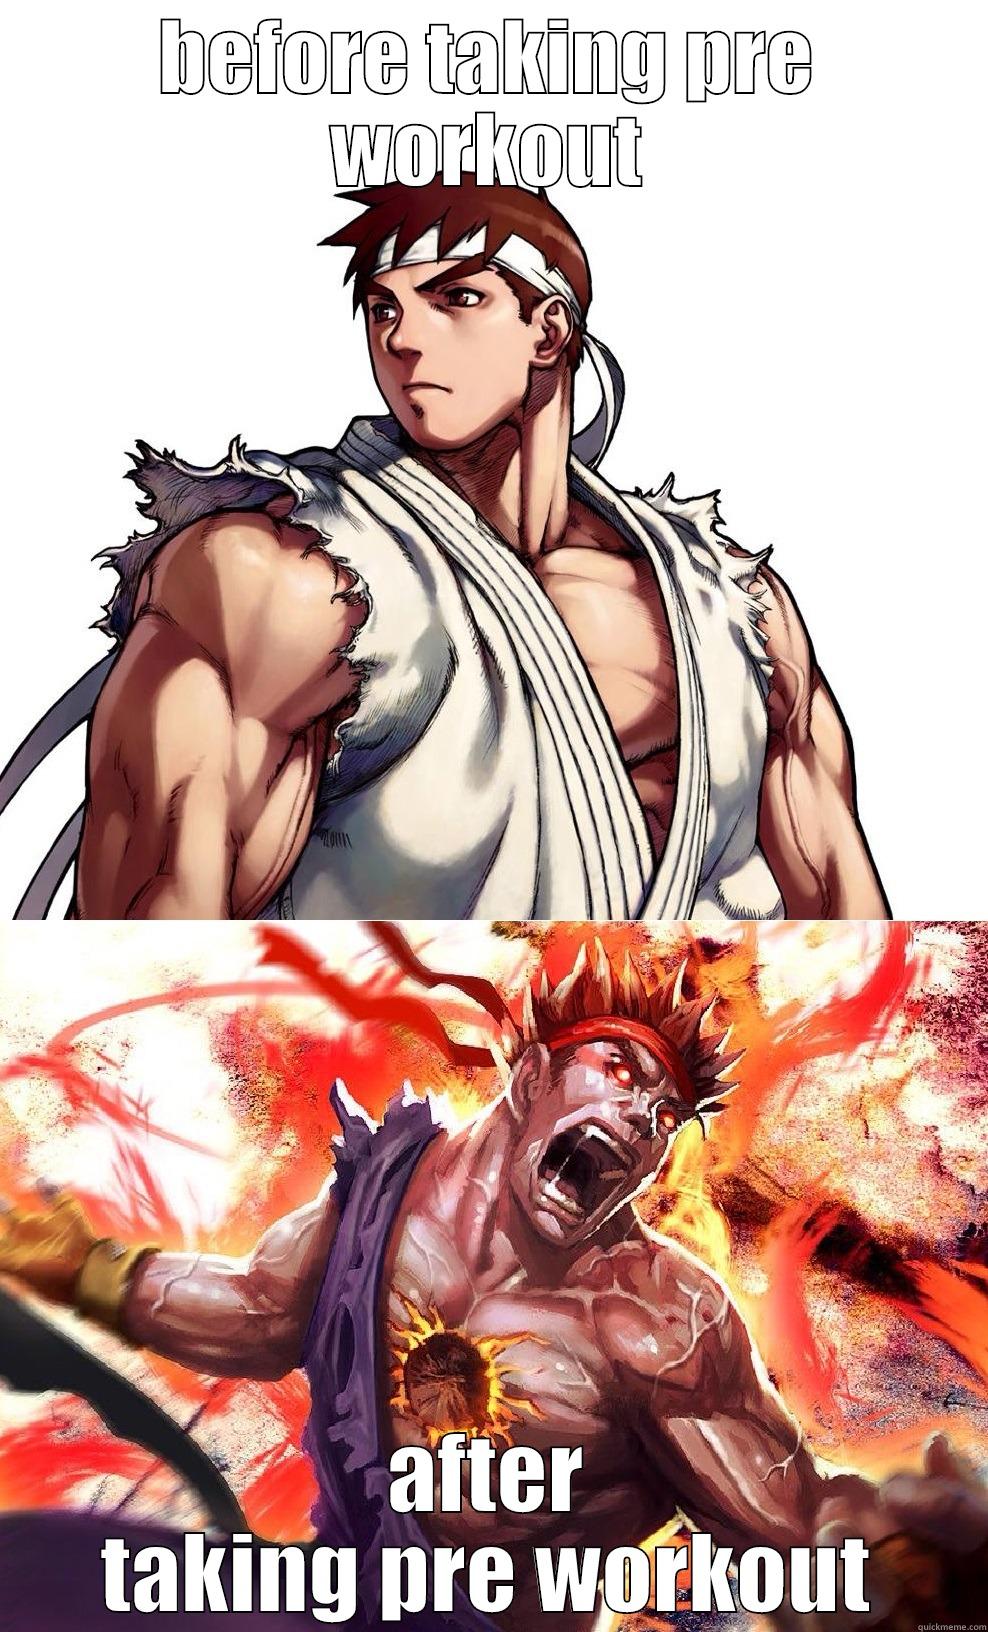 evil ryu - BEFORE TAKING PRE WORKOUT AFTER TAKING PRE WORKOUT Misc